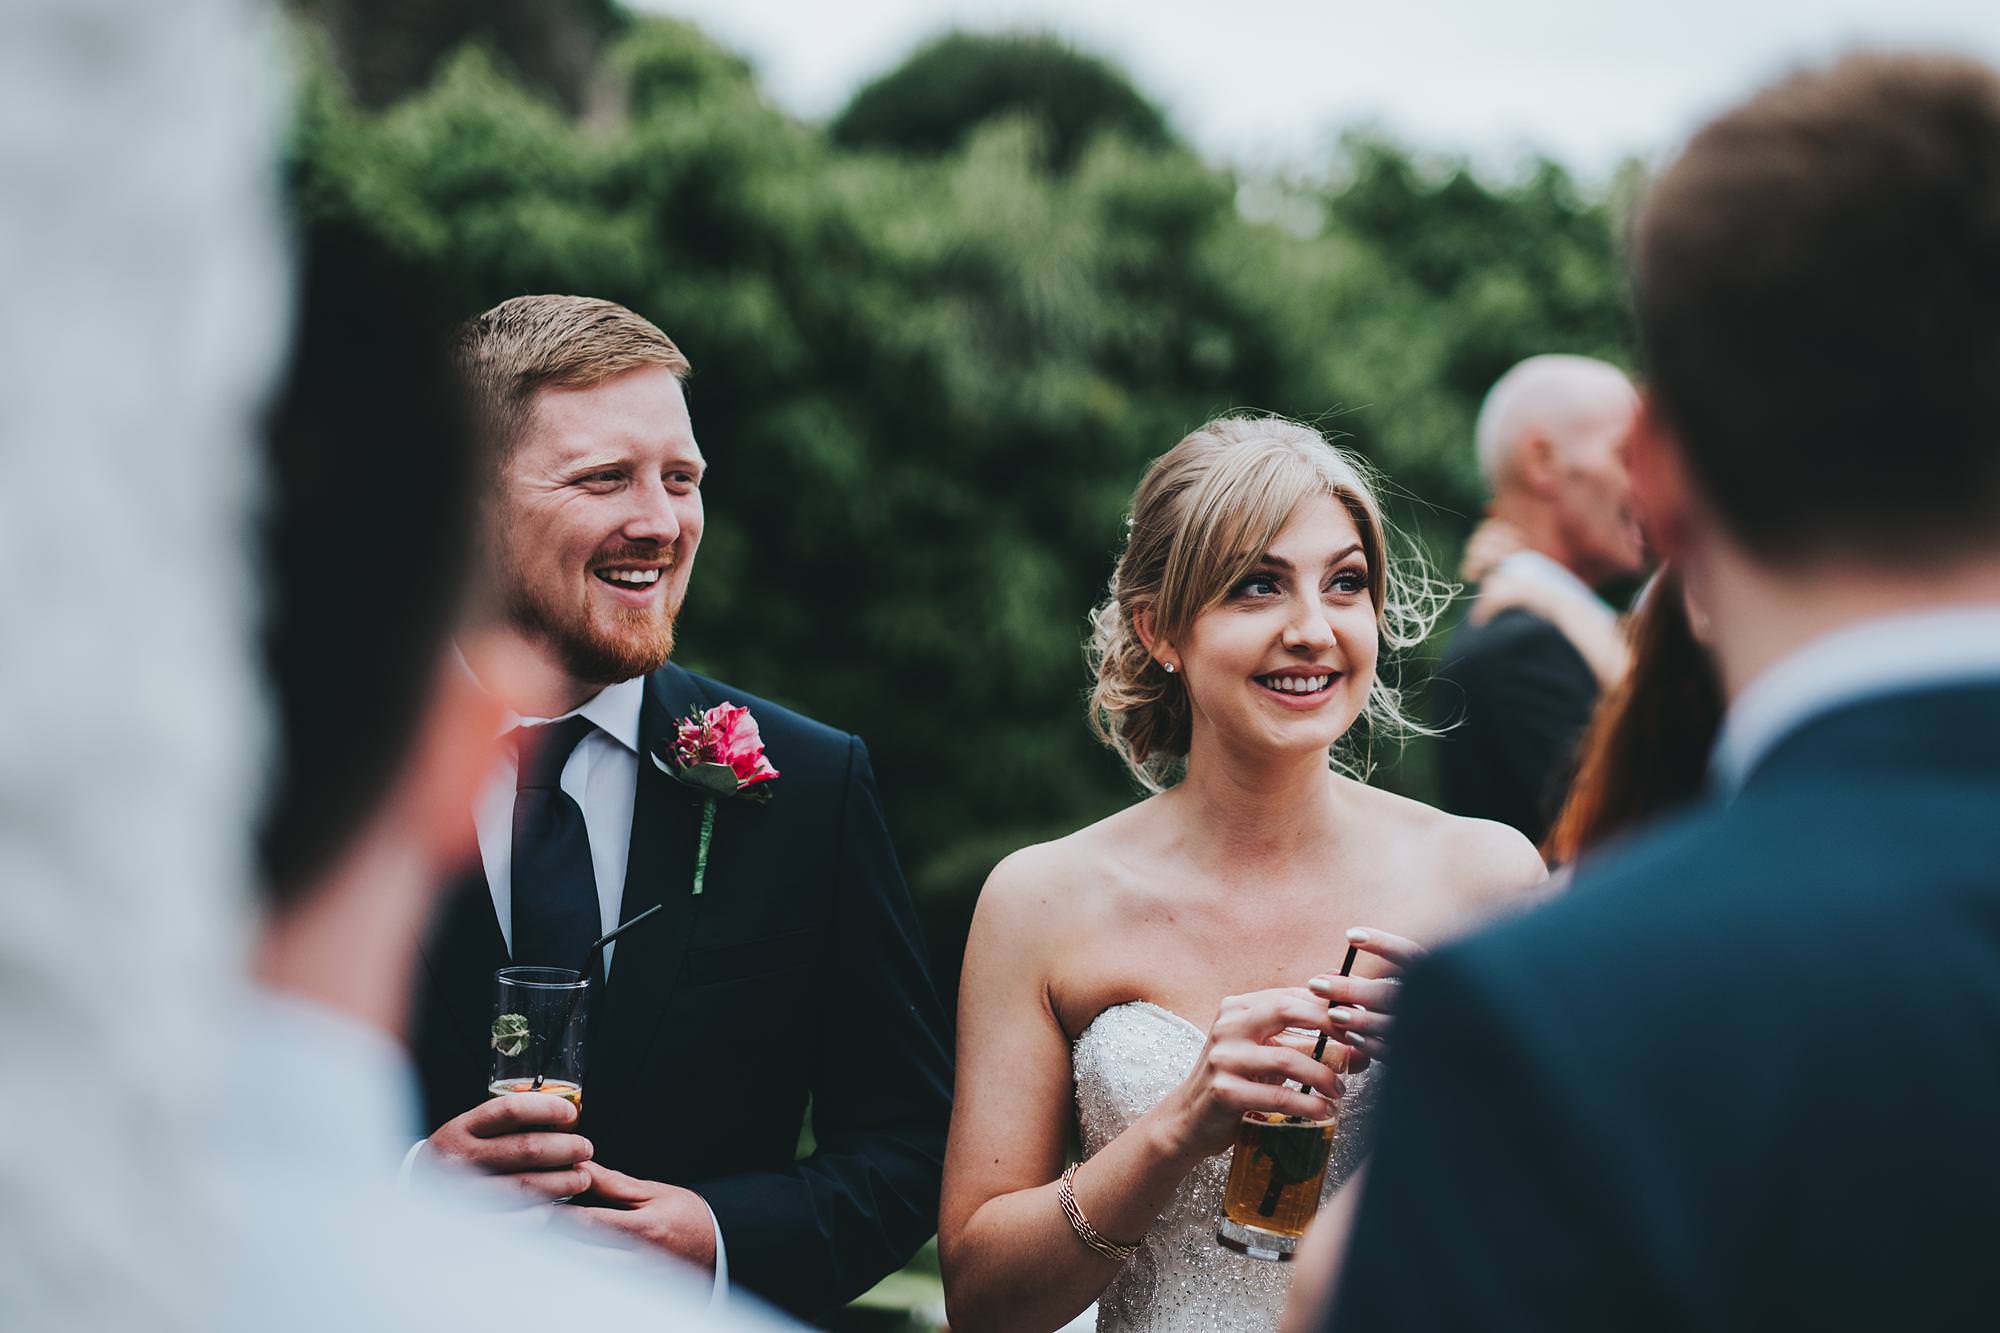 Wedding at The Old Rectory in Hastings // Anna & Gary